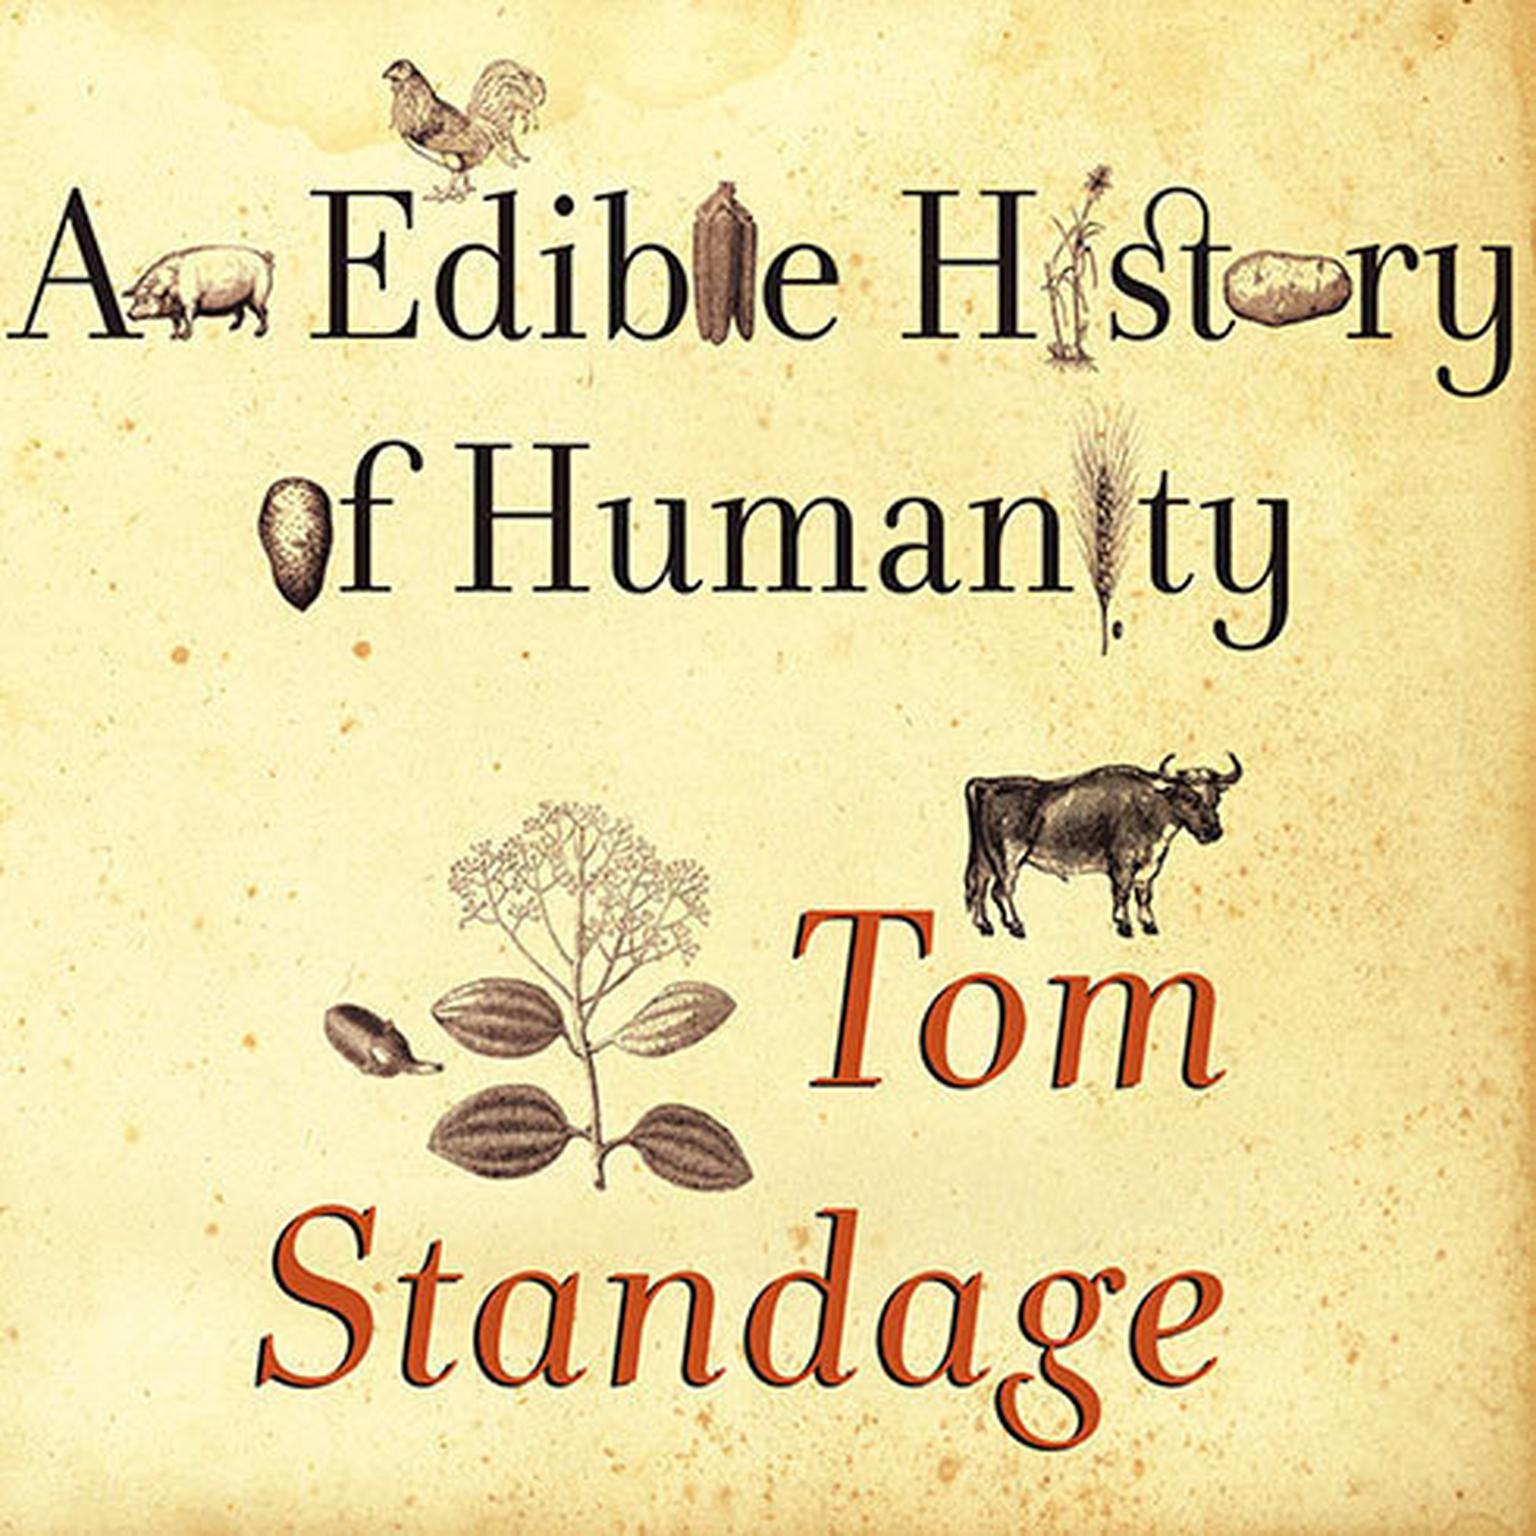 An Edible History of Humanity Audiobook, by Tom Standage